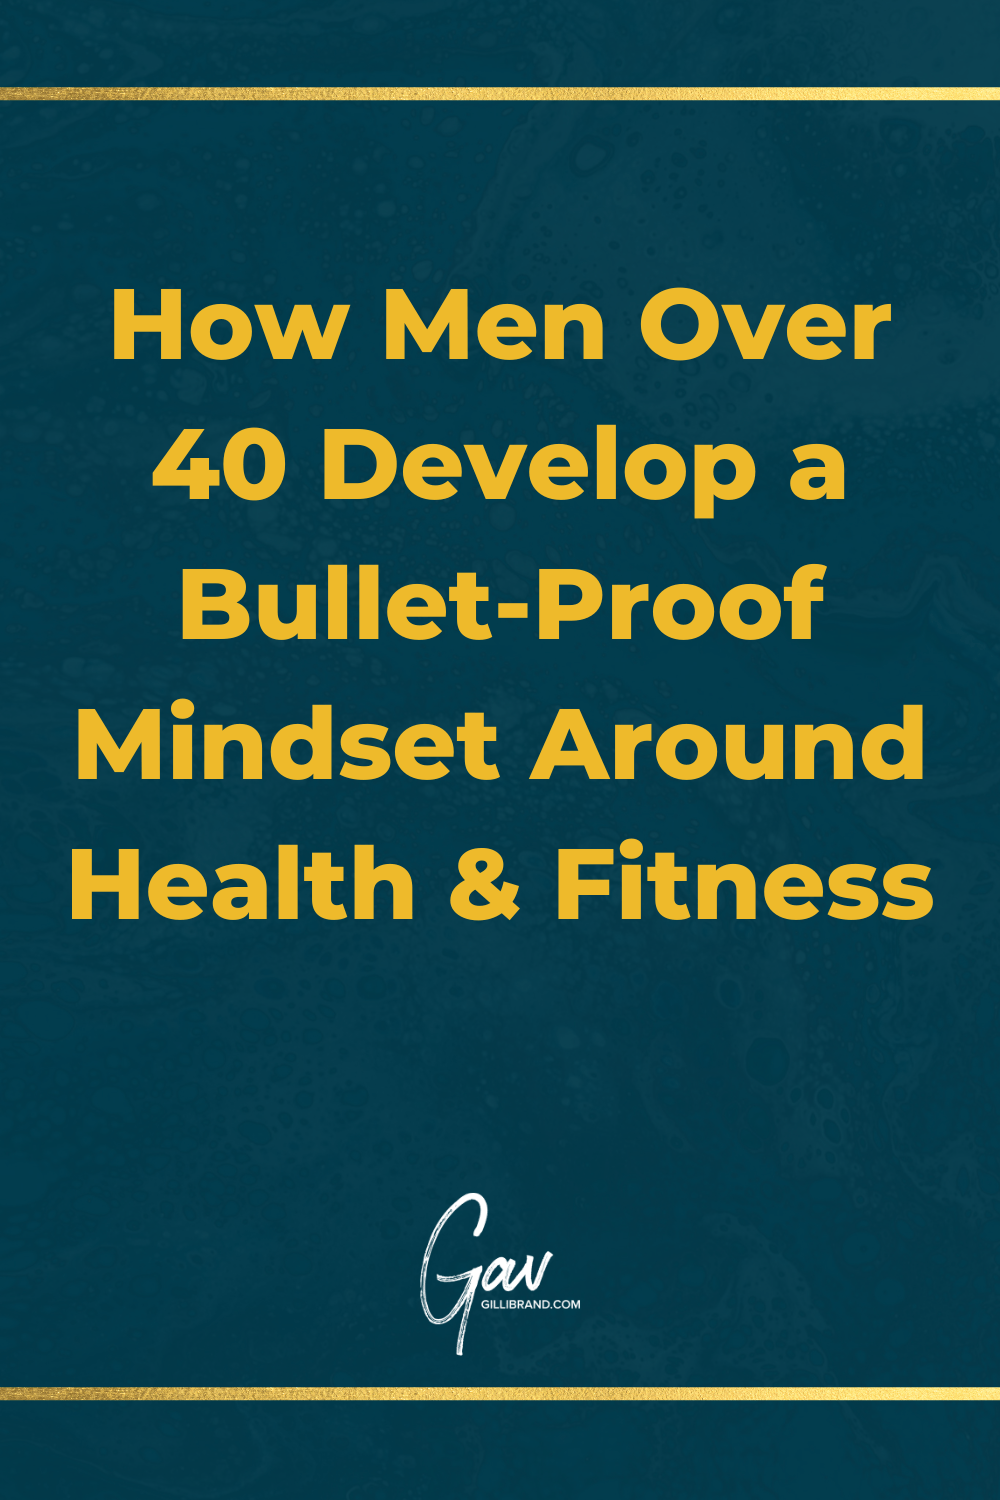 Featured image for “How Men Over 40 Develop a Bullet-Proof Mindset Around Health & Fitness”